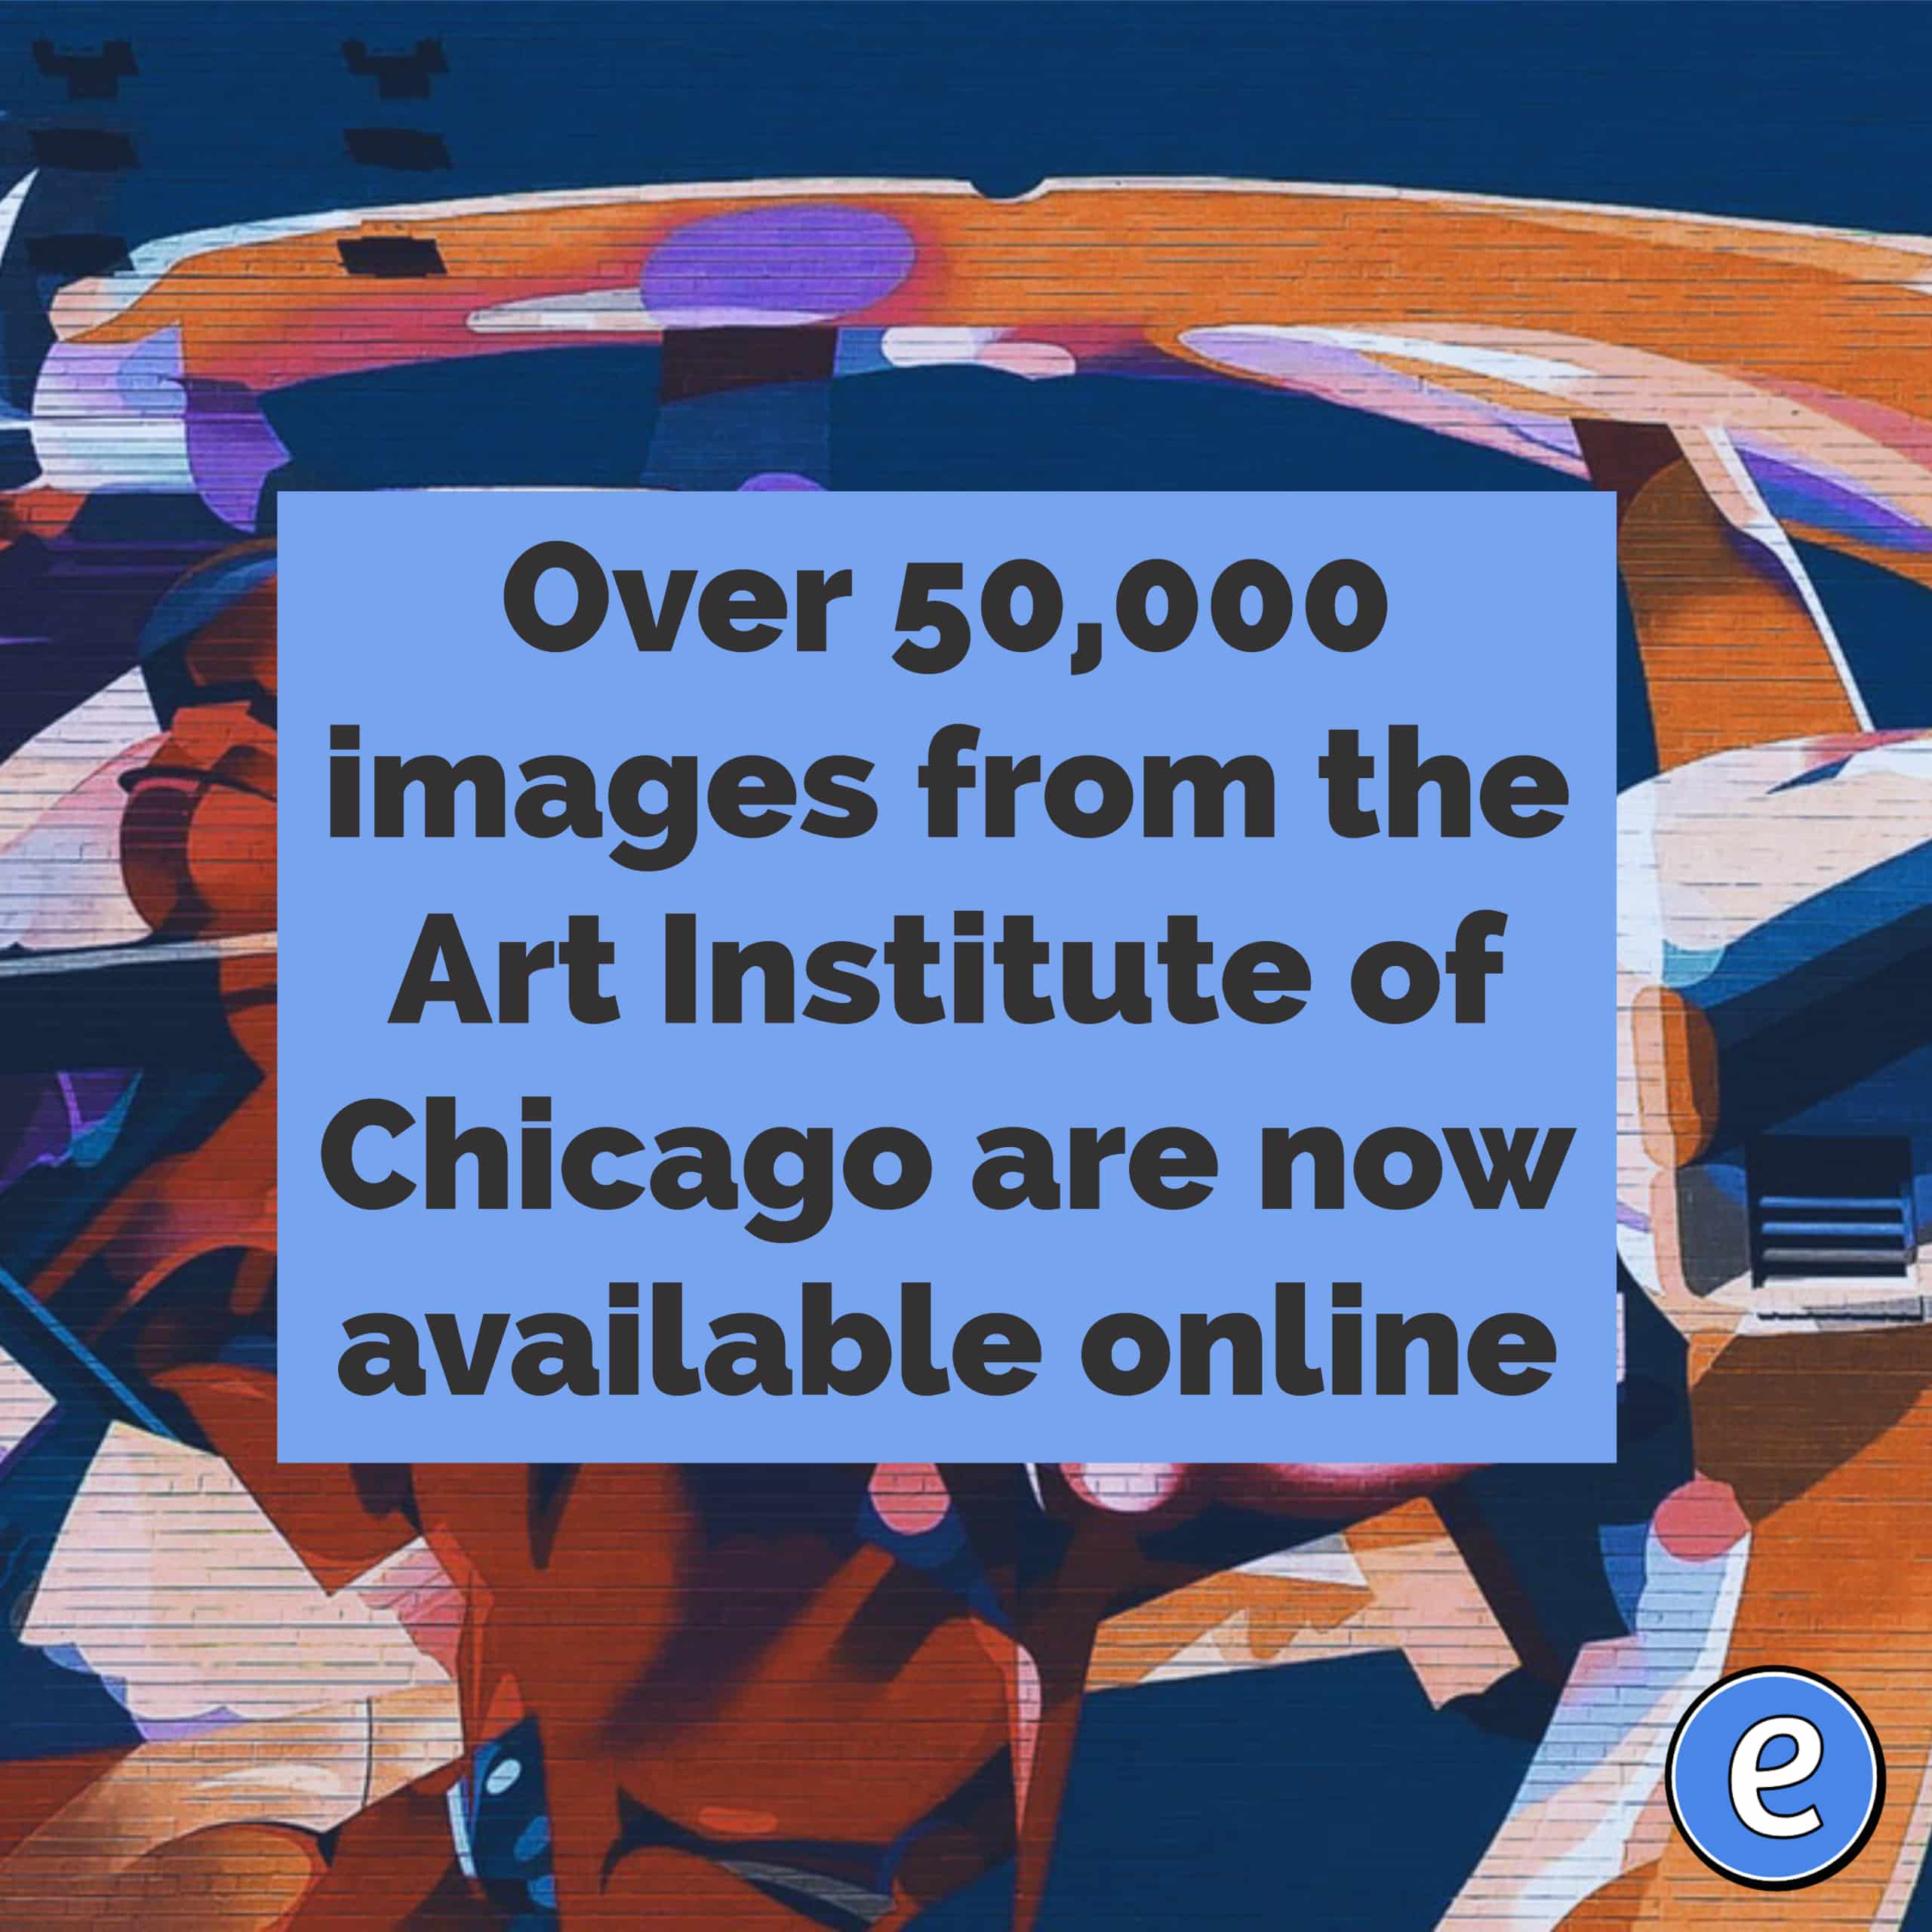 Over 50,000 images from the Art Institute of Chicago are now available online